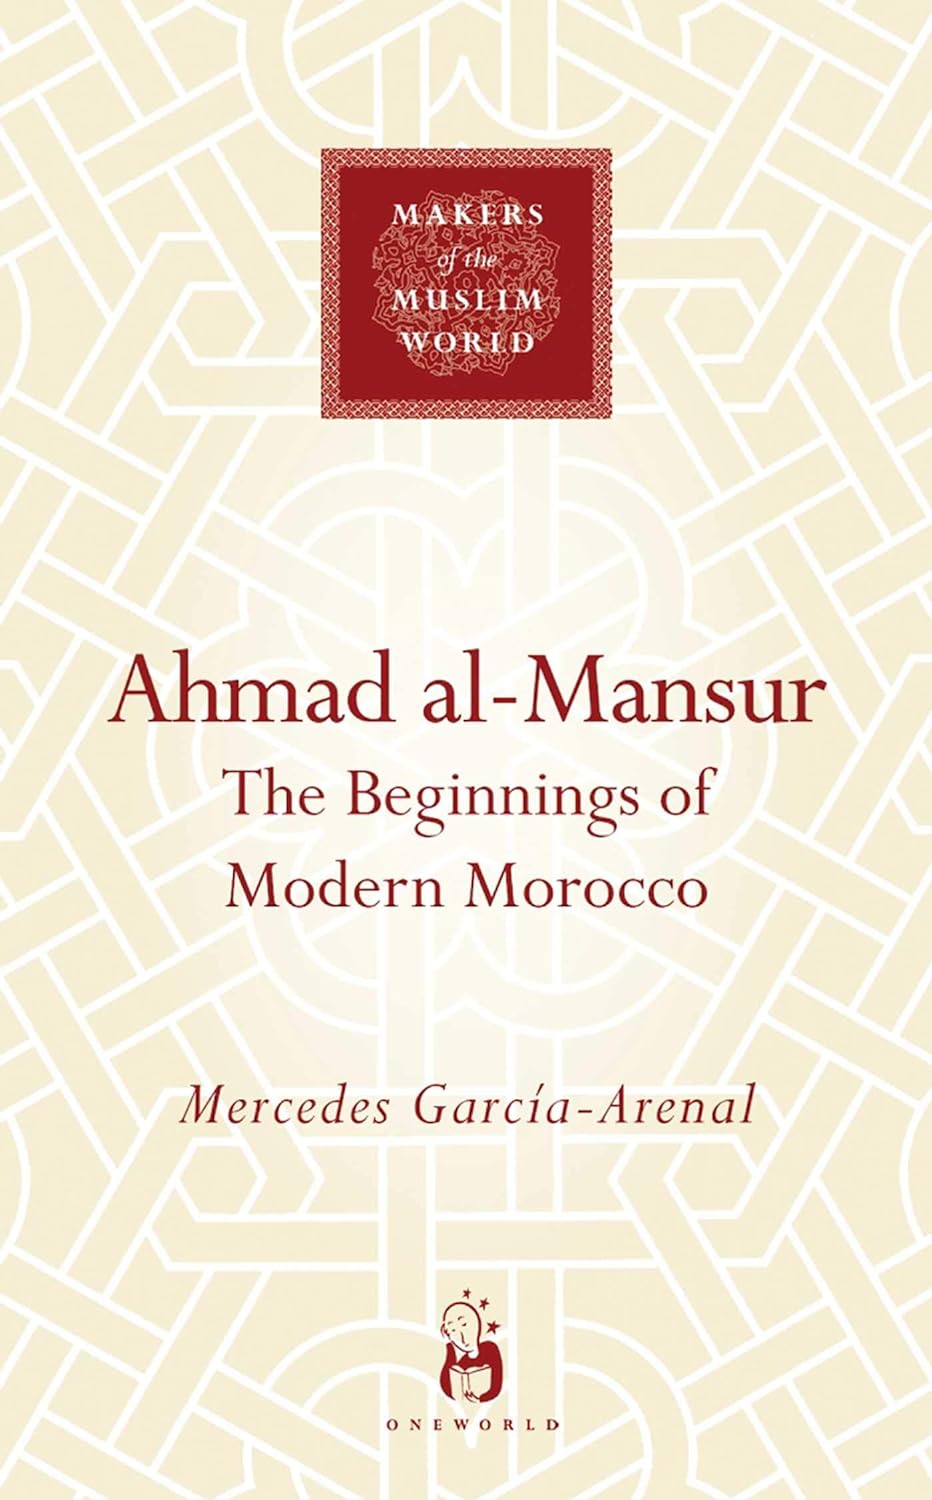 Ahmad al-Mansur: The Beginnings of Modern Morocco (Makers of the Muslim World) by Mercedes Garcia-Arenal